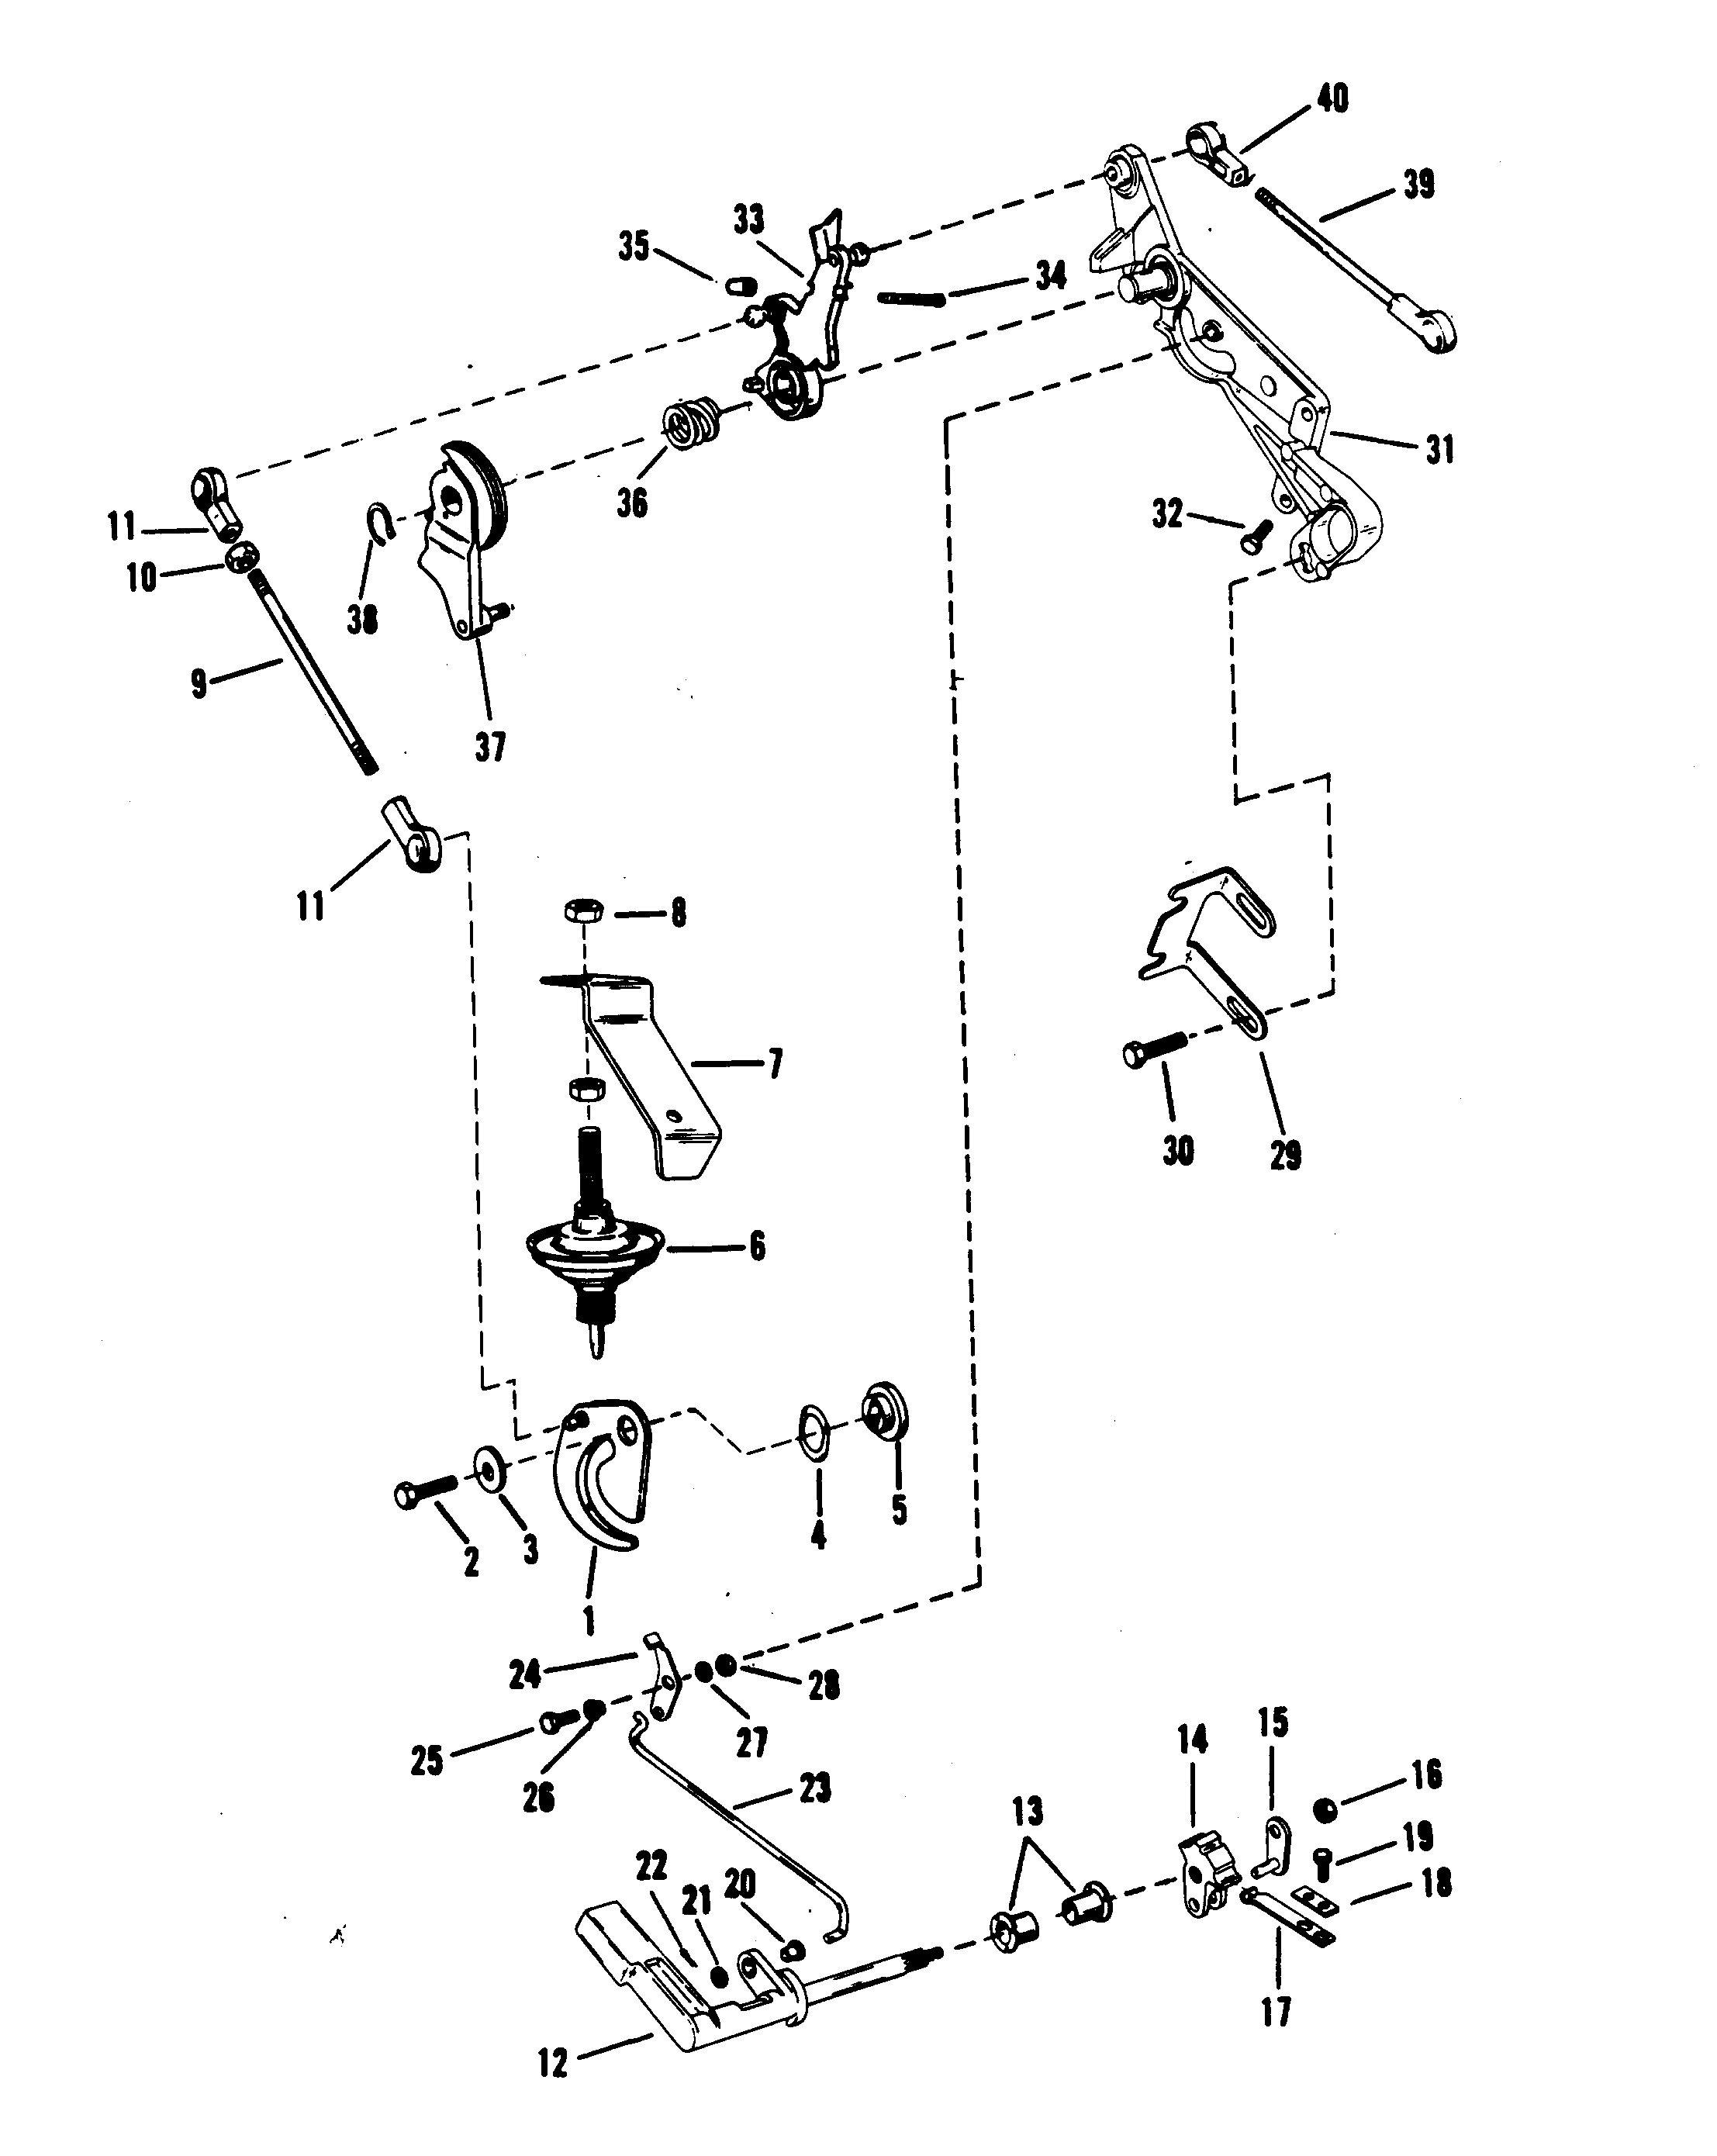 25 HP Mercury Outboard Parts List And Diagram